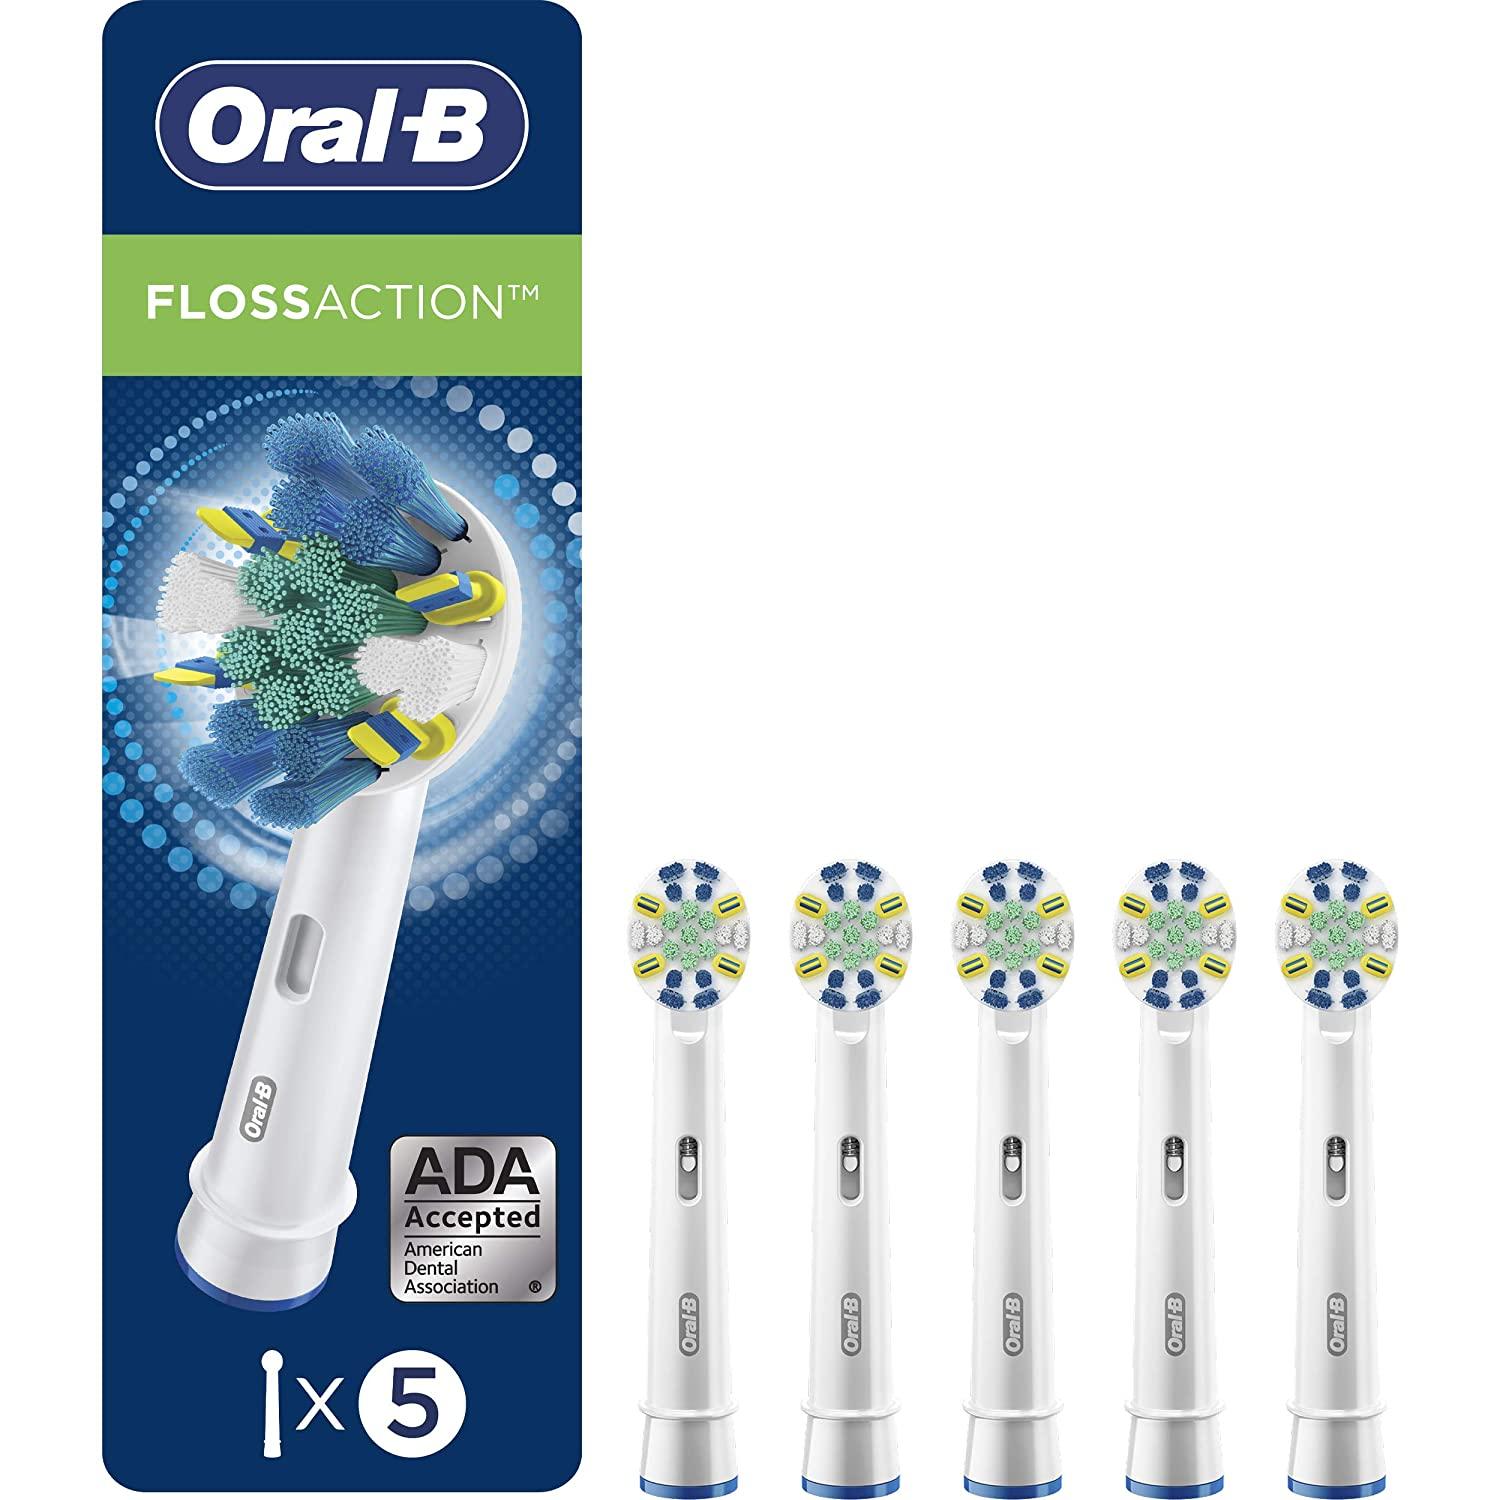 Oral-B FlossAction Toothbrush Refill Brush Heads for $21.37 Shipped